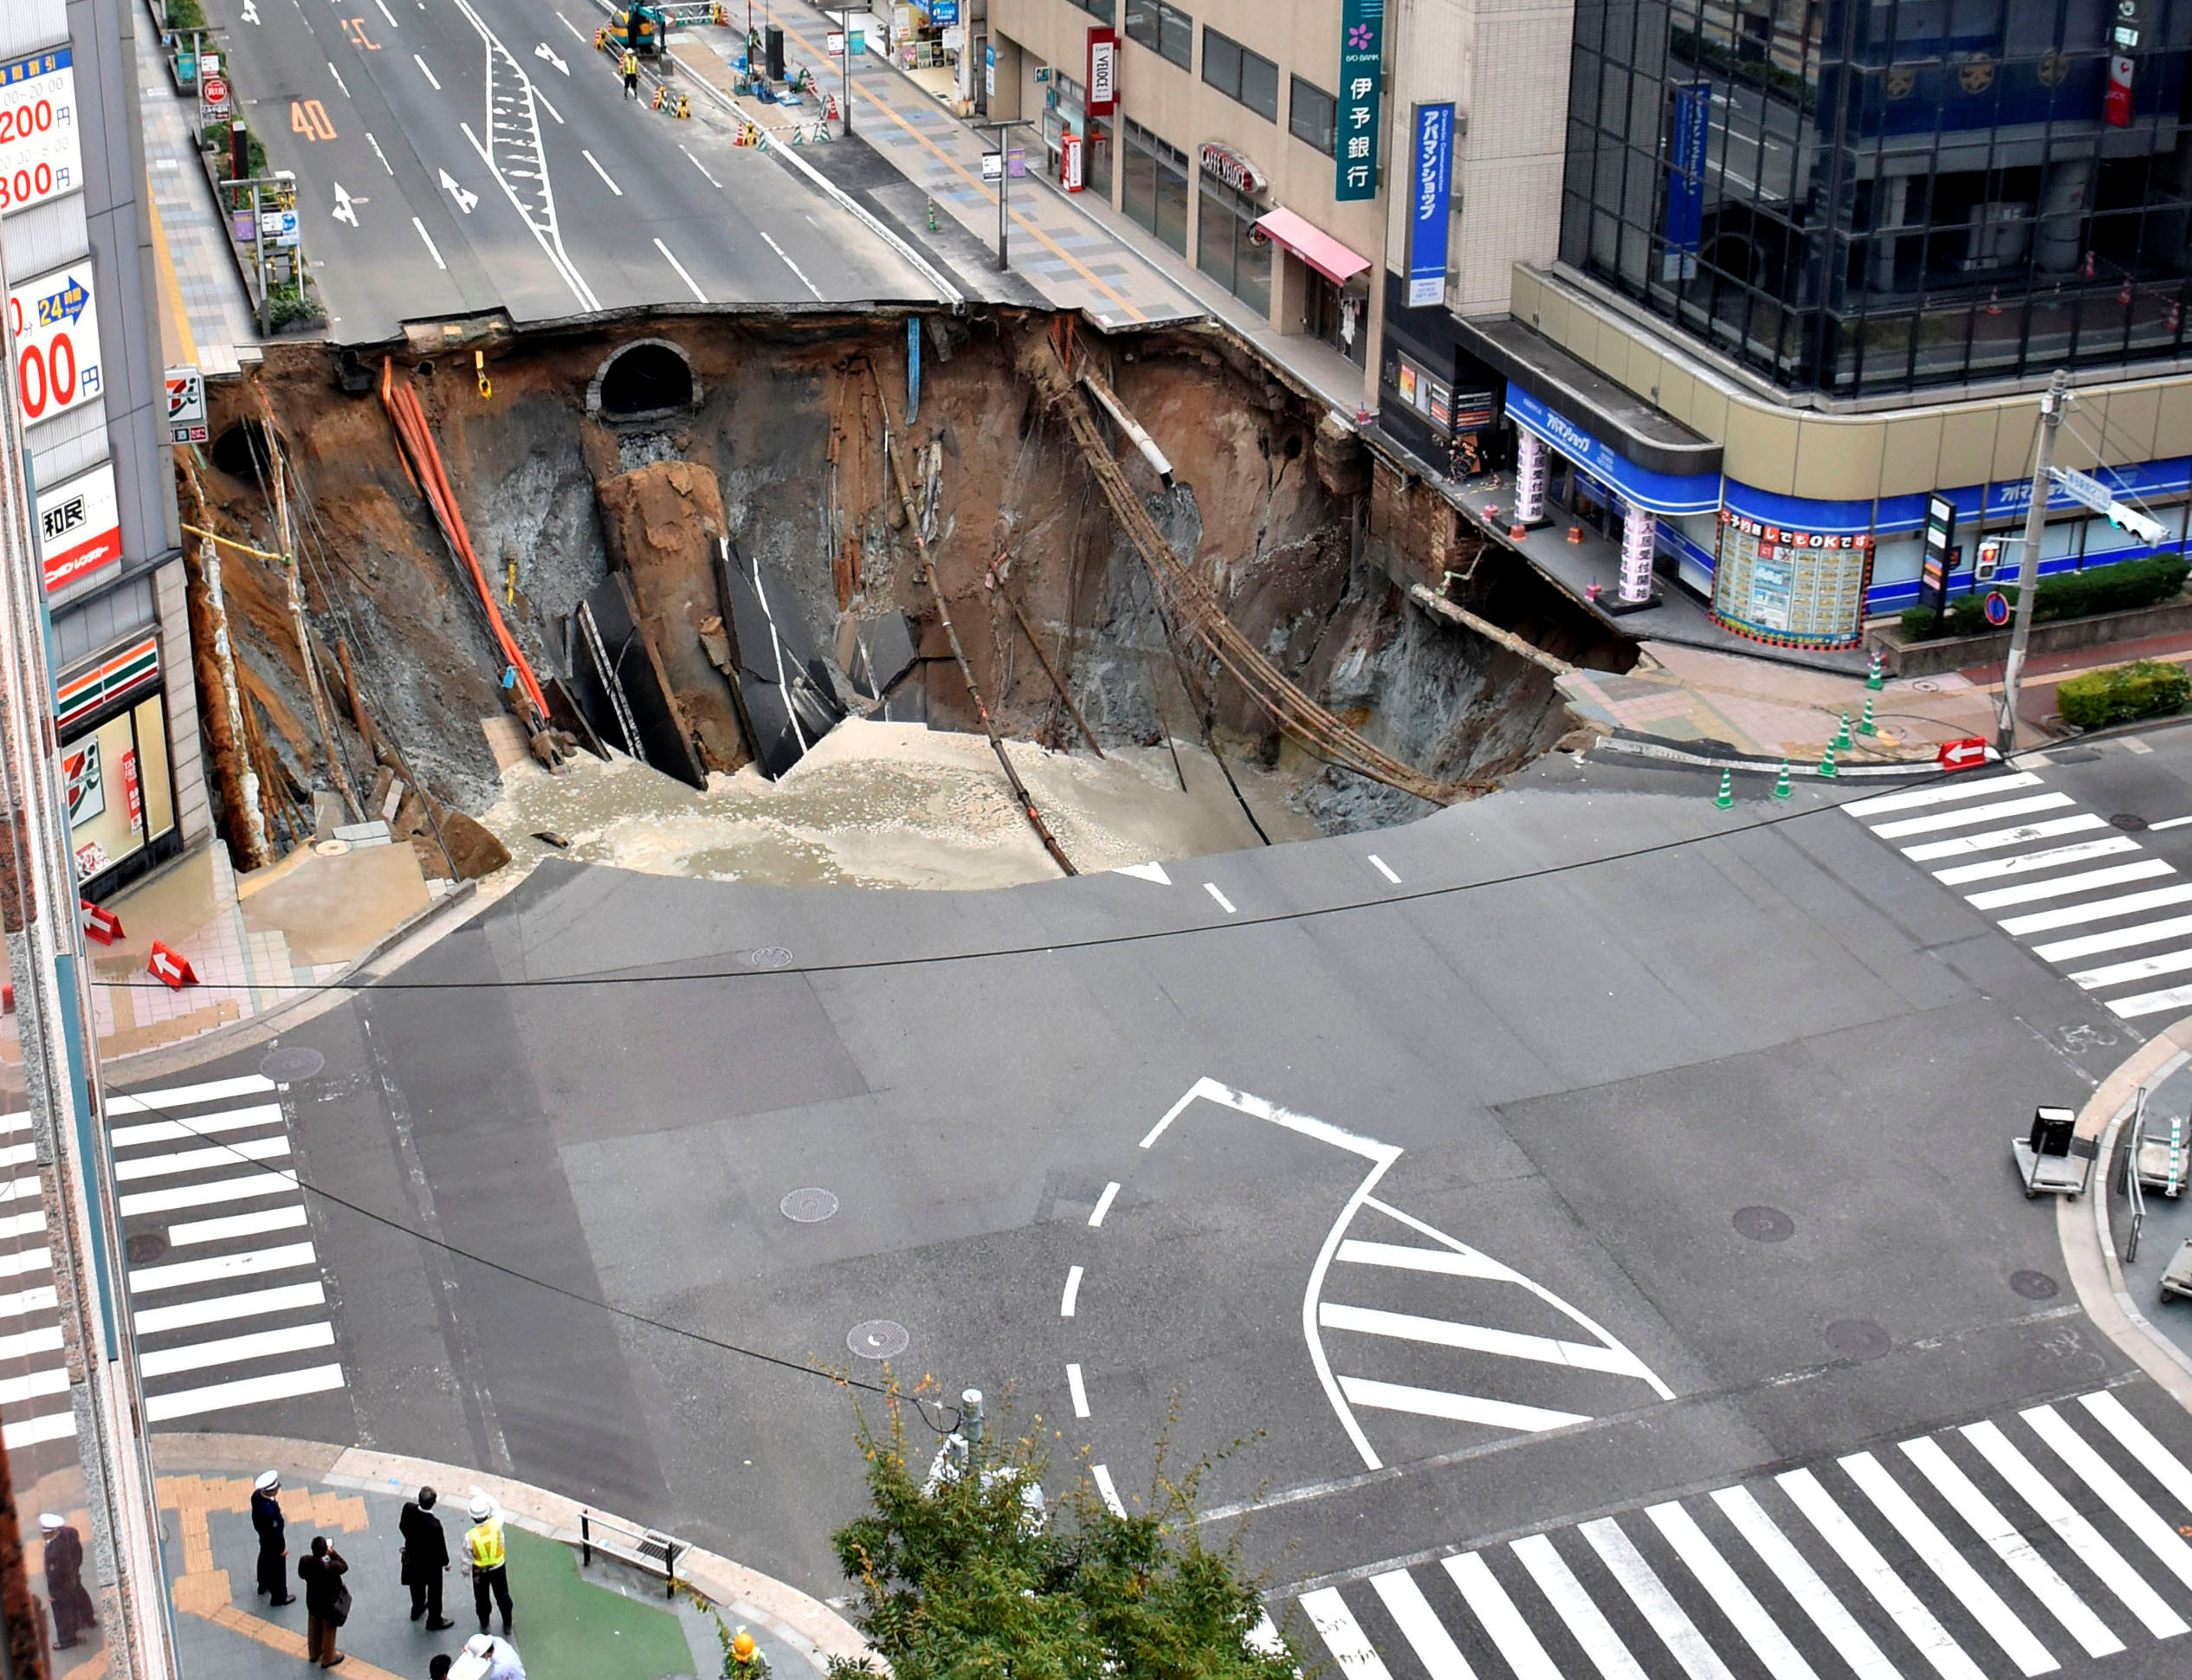 A huge sinkhole is seen at an intersection near Hakata station in Fukuoka, Japan, November 8, 2016 in this photo taken by Kyodo. Mandatory credit Kyodo/via REUTERS ATTENTION EDITORS - THIS IMAGE WAS PROVIDED BY A THIRD PARTY. EDITORIAL USE ONLY. MANDATORY